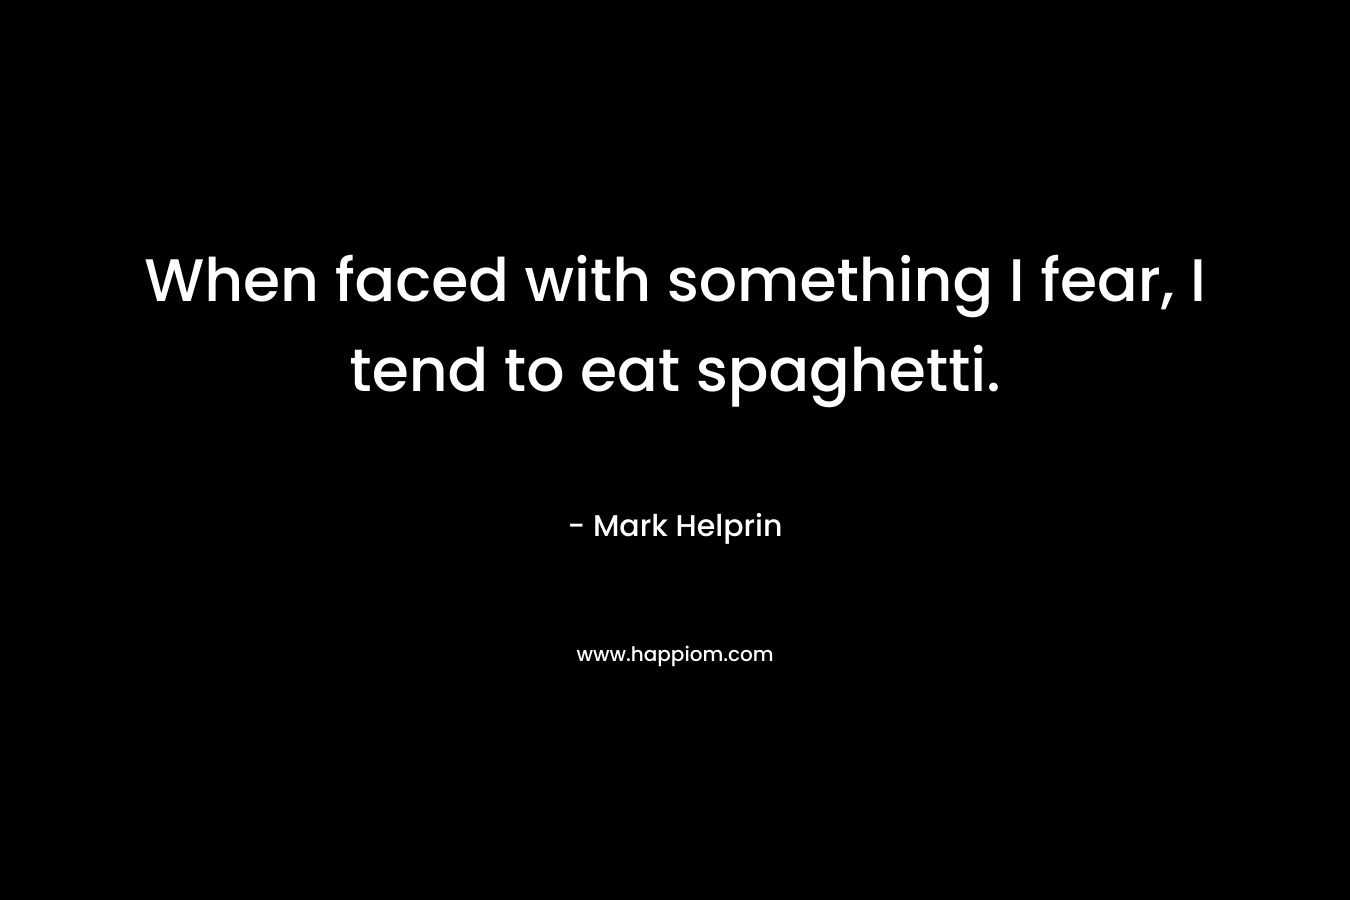 When faced with something I fear, I tend to eat spaghetti.